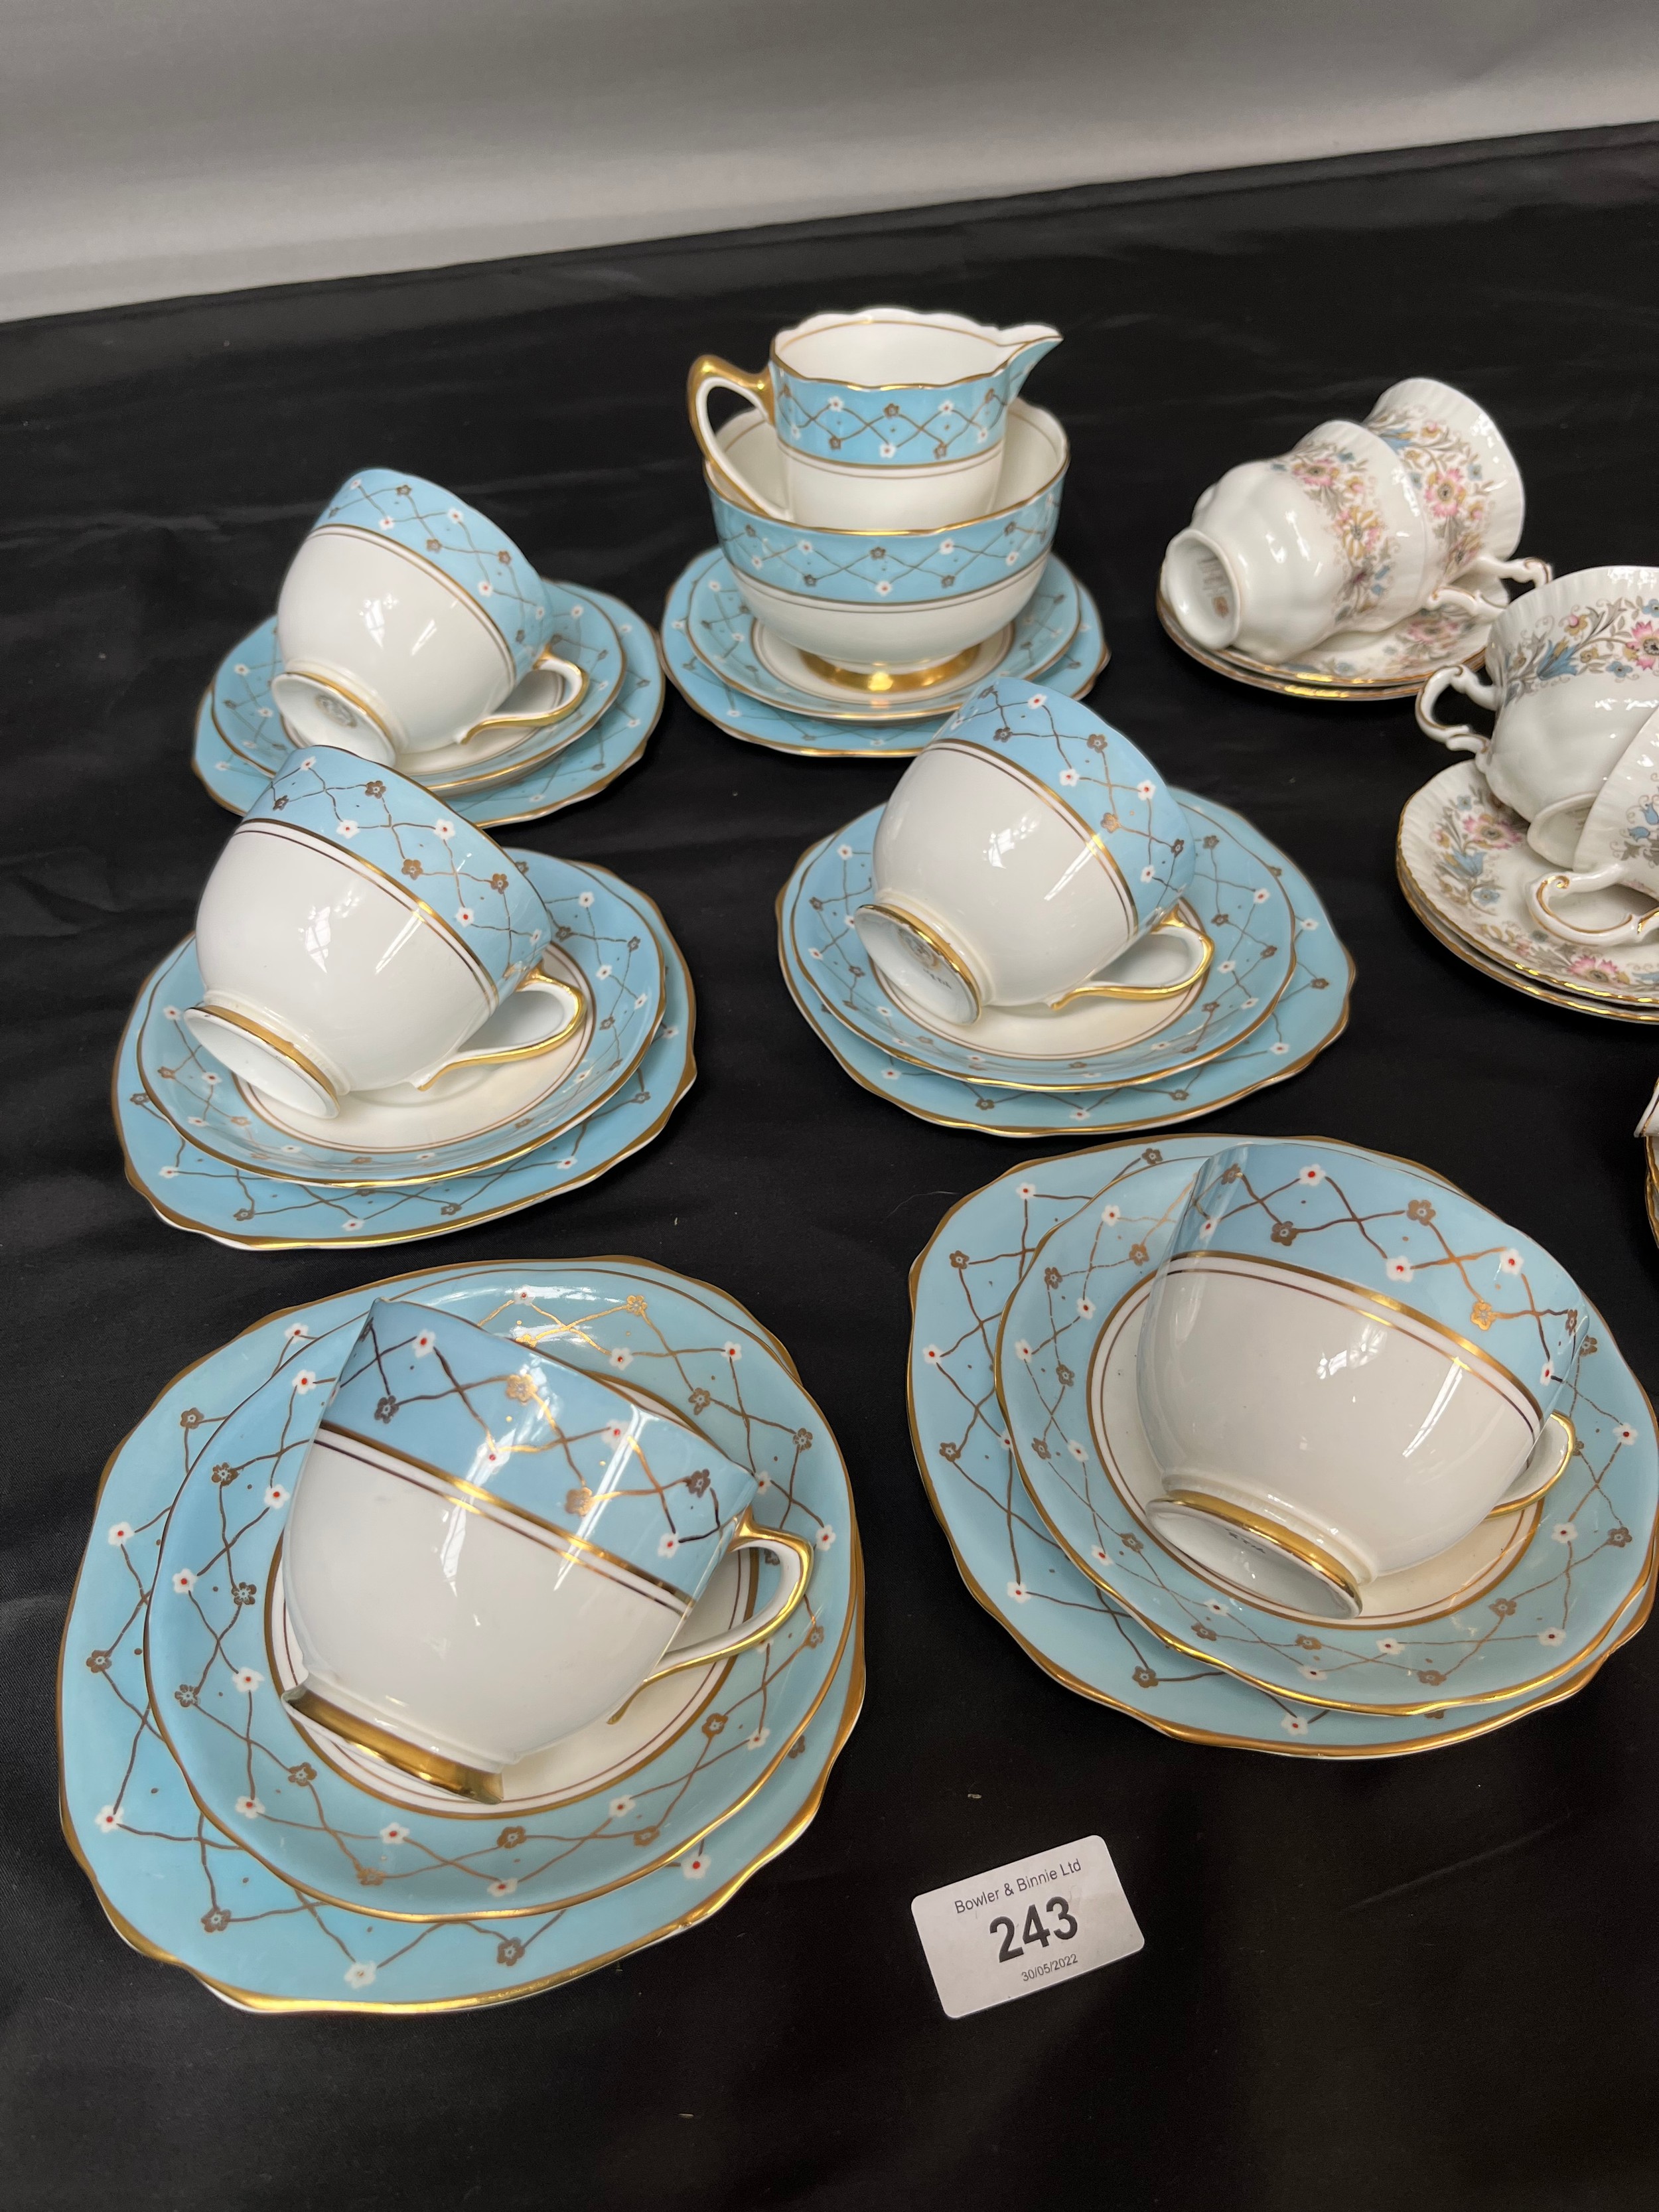 An 18 piece Royal Stafford tea set together with a 12 piece Paragon Meadowvale coffee set. - Image 2 of 3